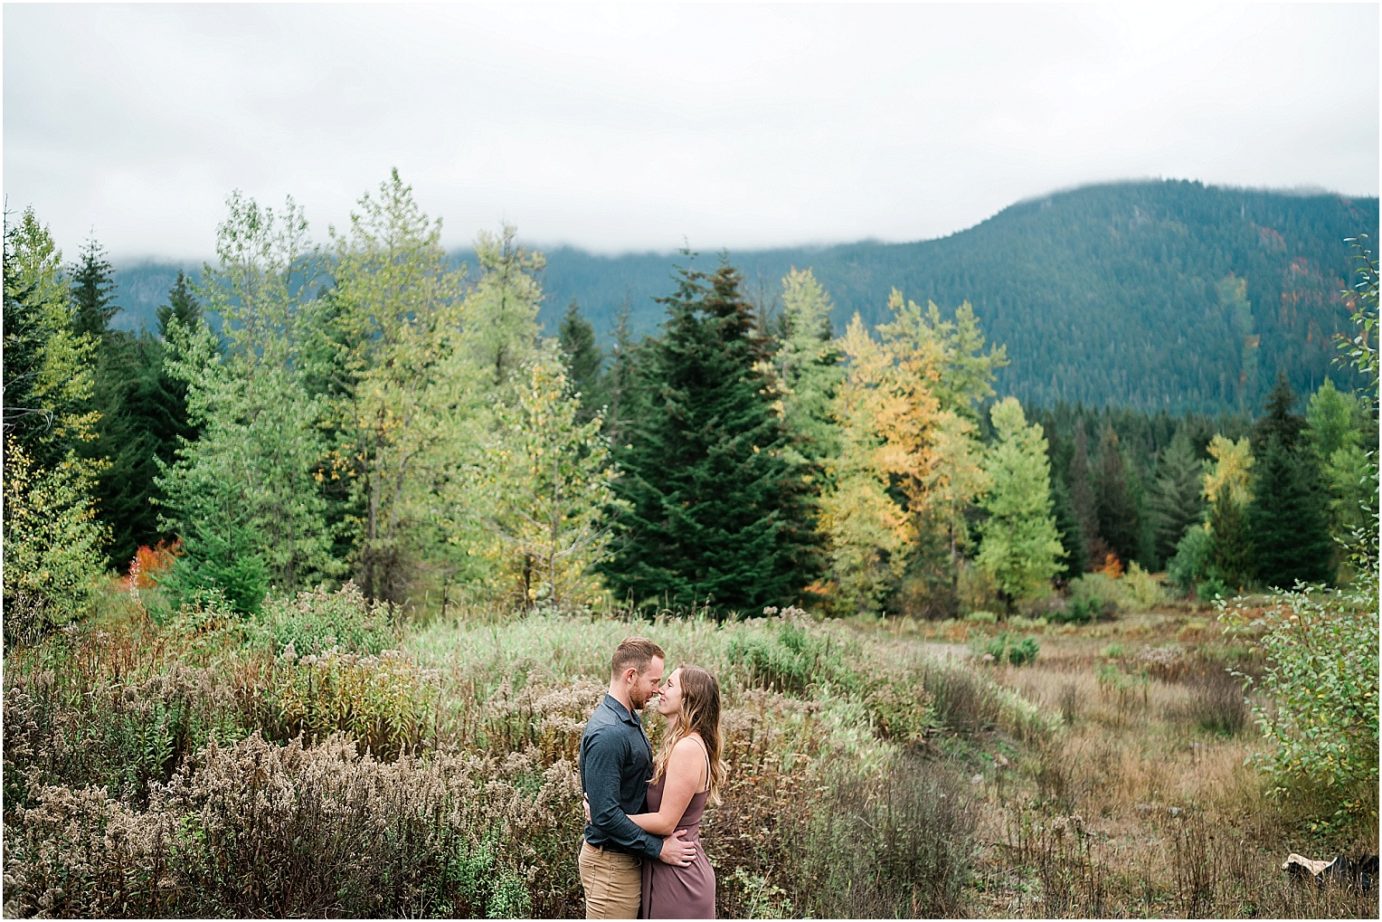 Keechelus Lake Engagement Session Snoqualmie Pass Sean and Megan standing in a field